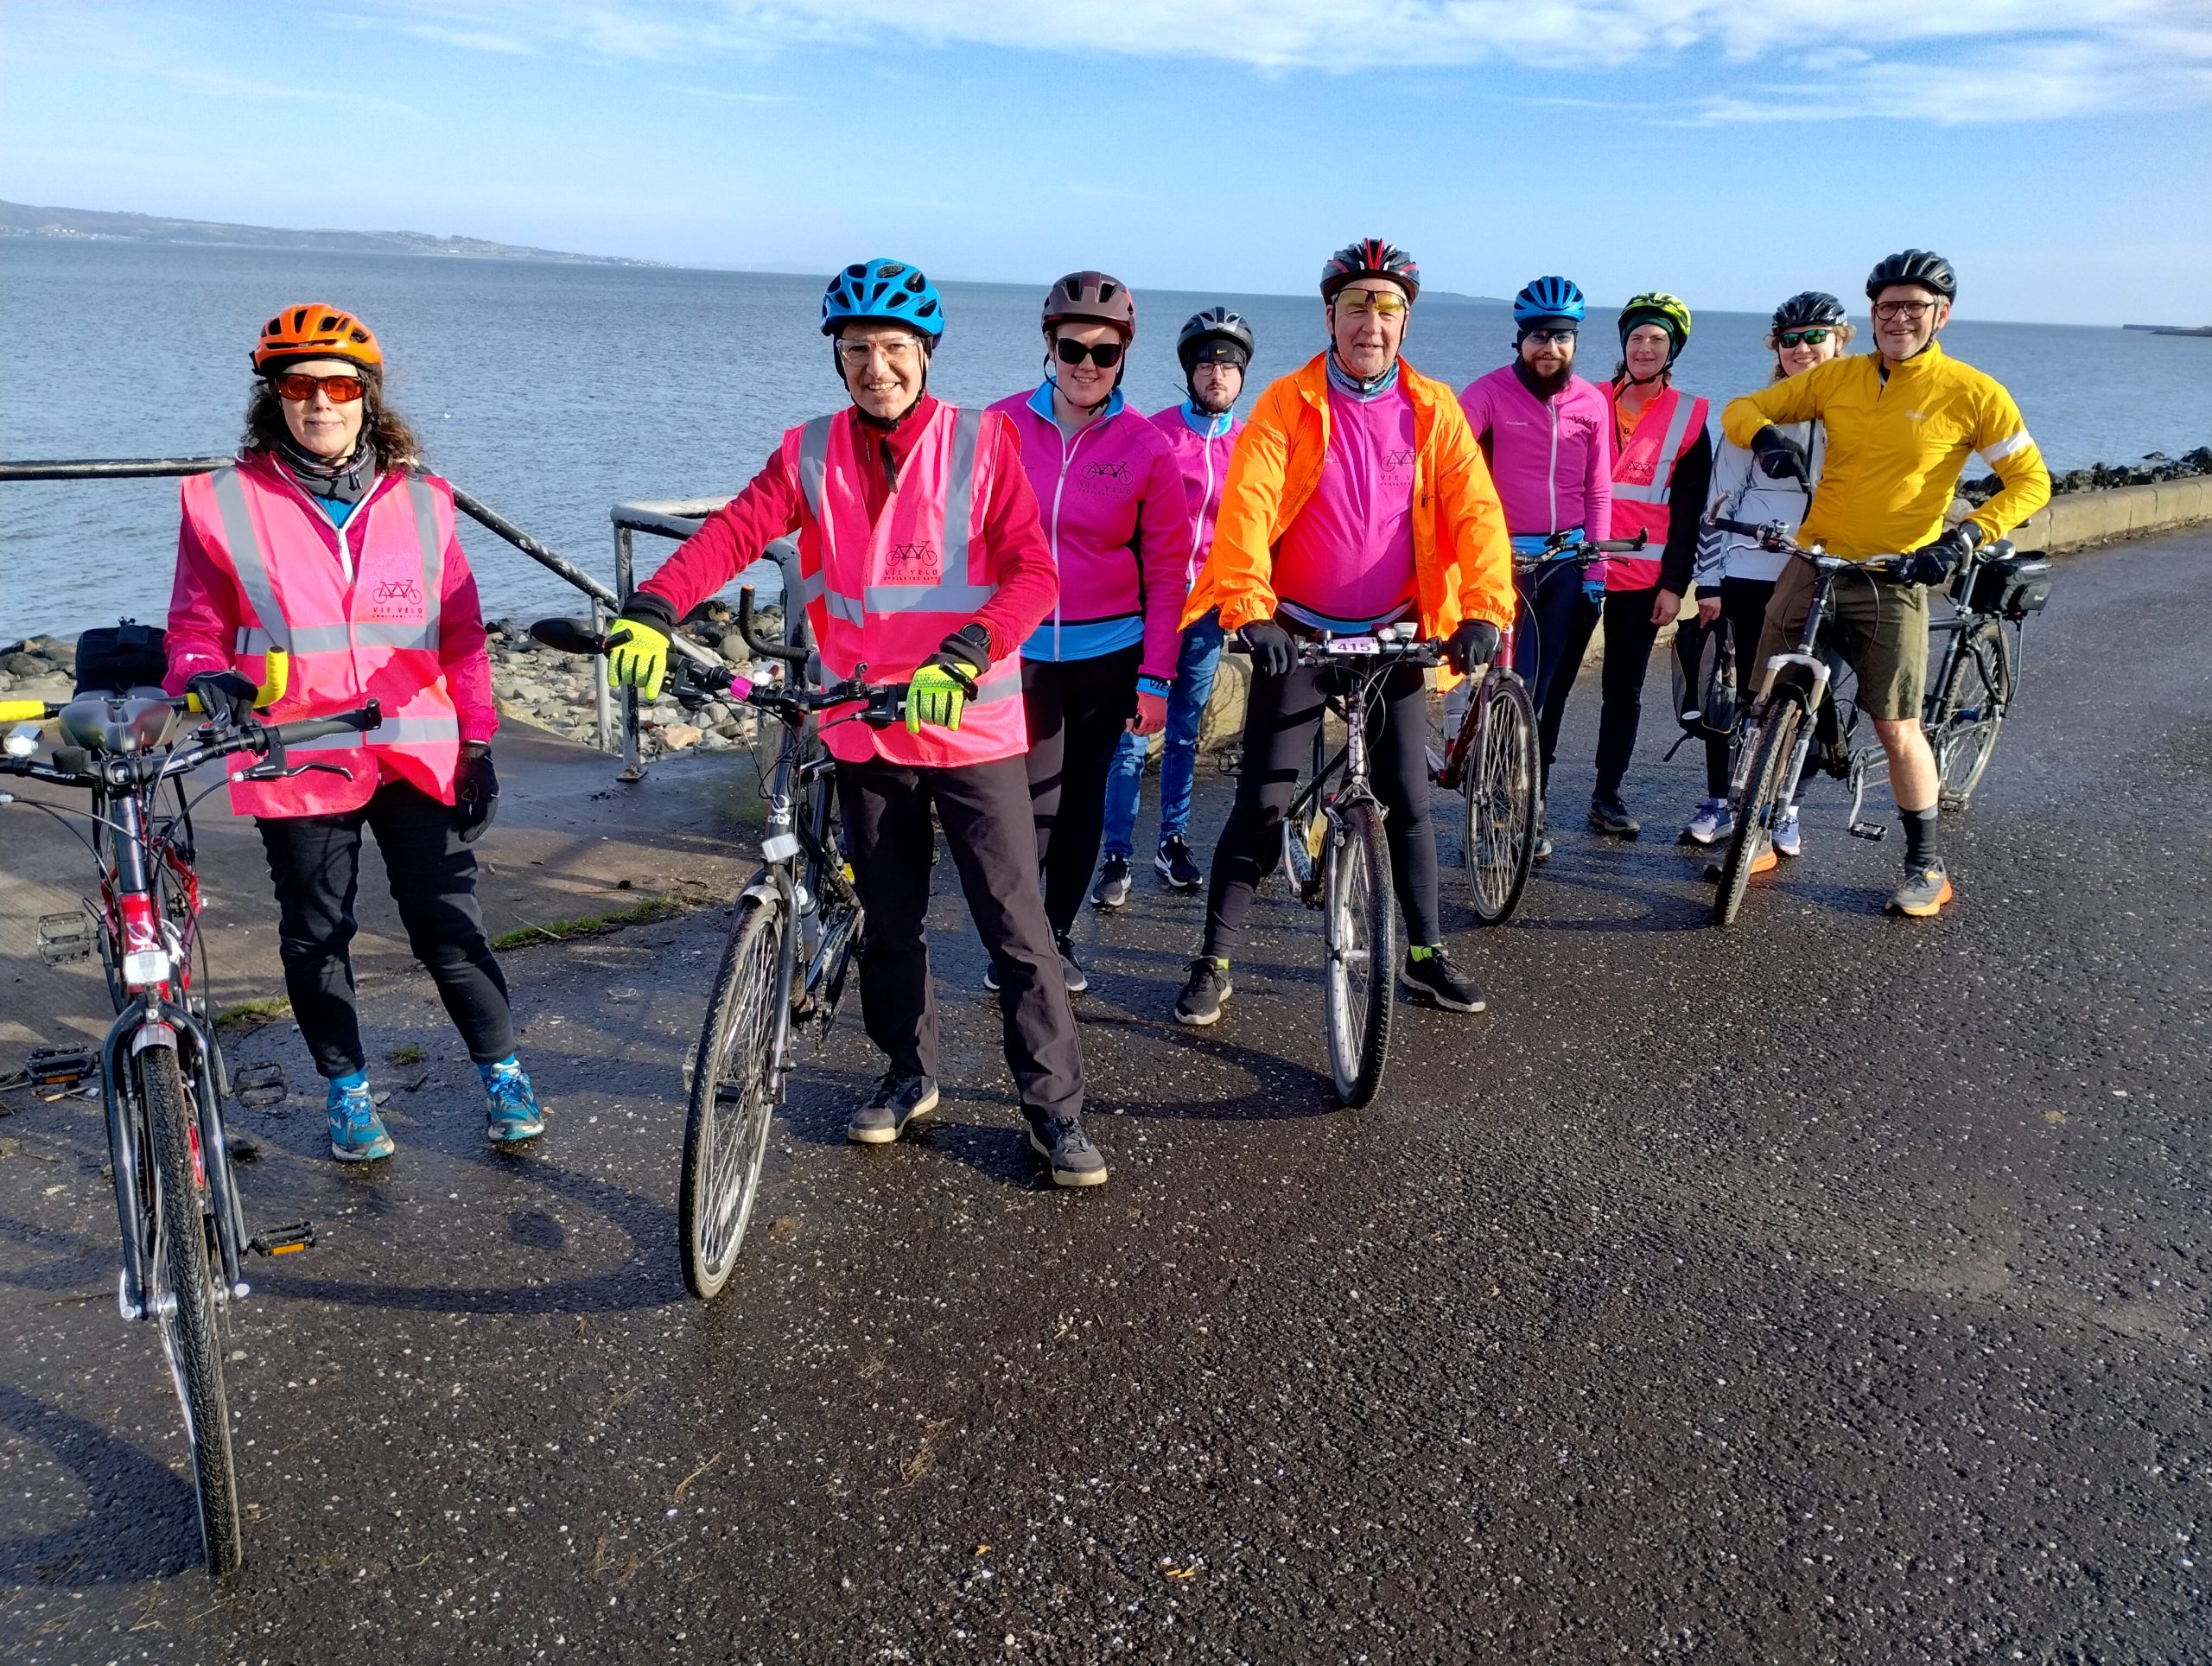 Image shows a group of people tandem bicycles, on a path next to the sea.